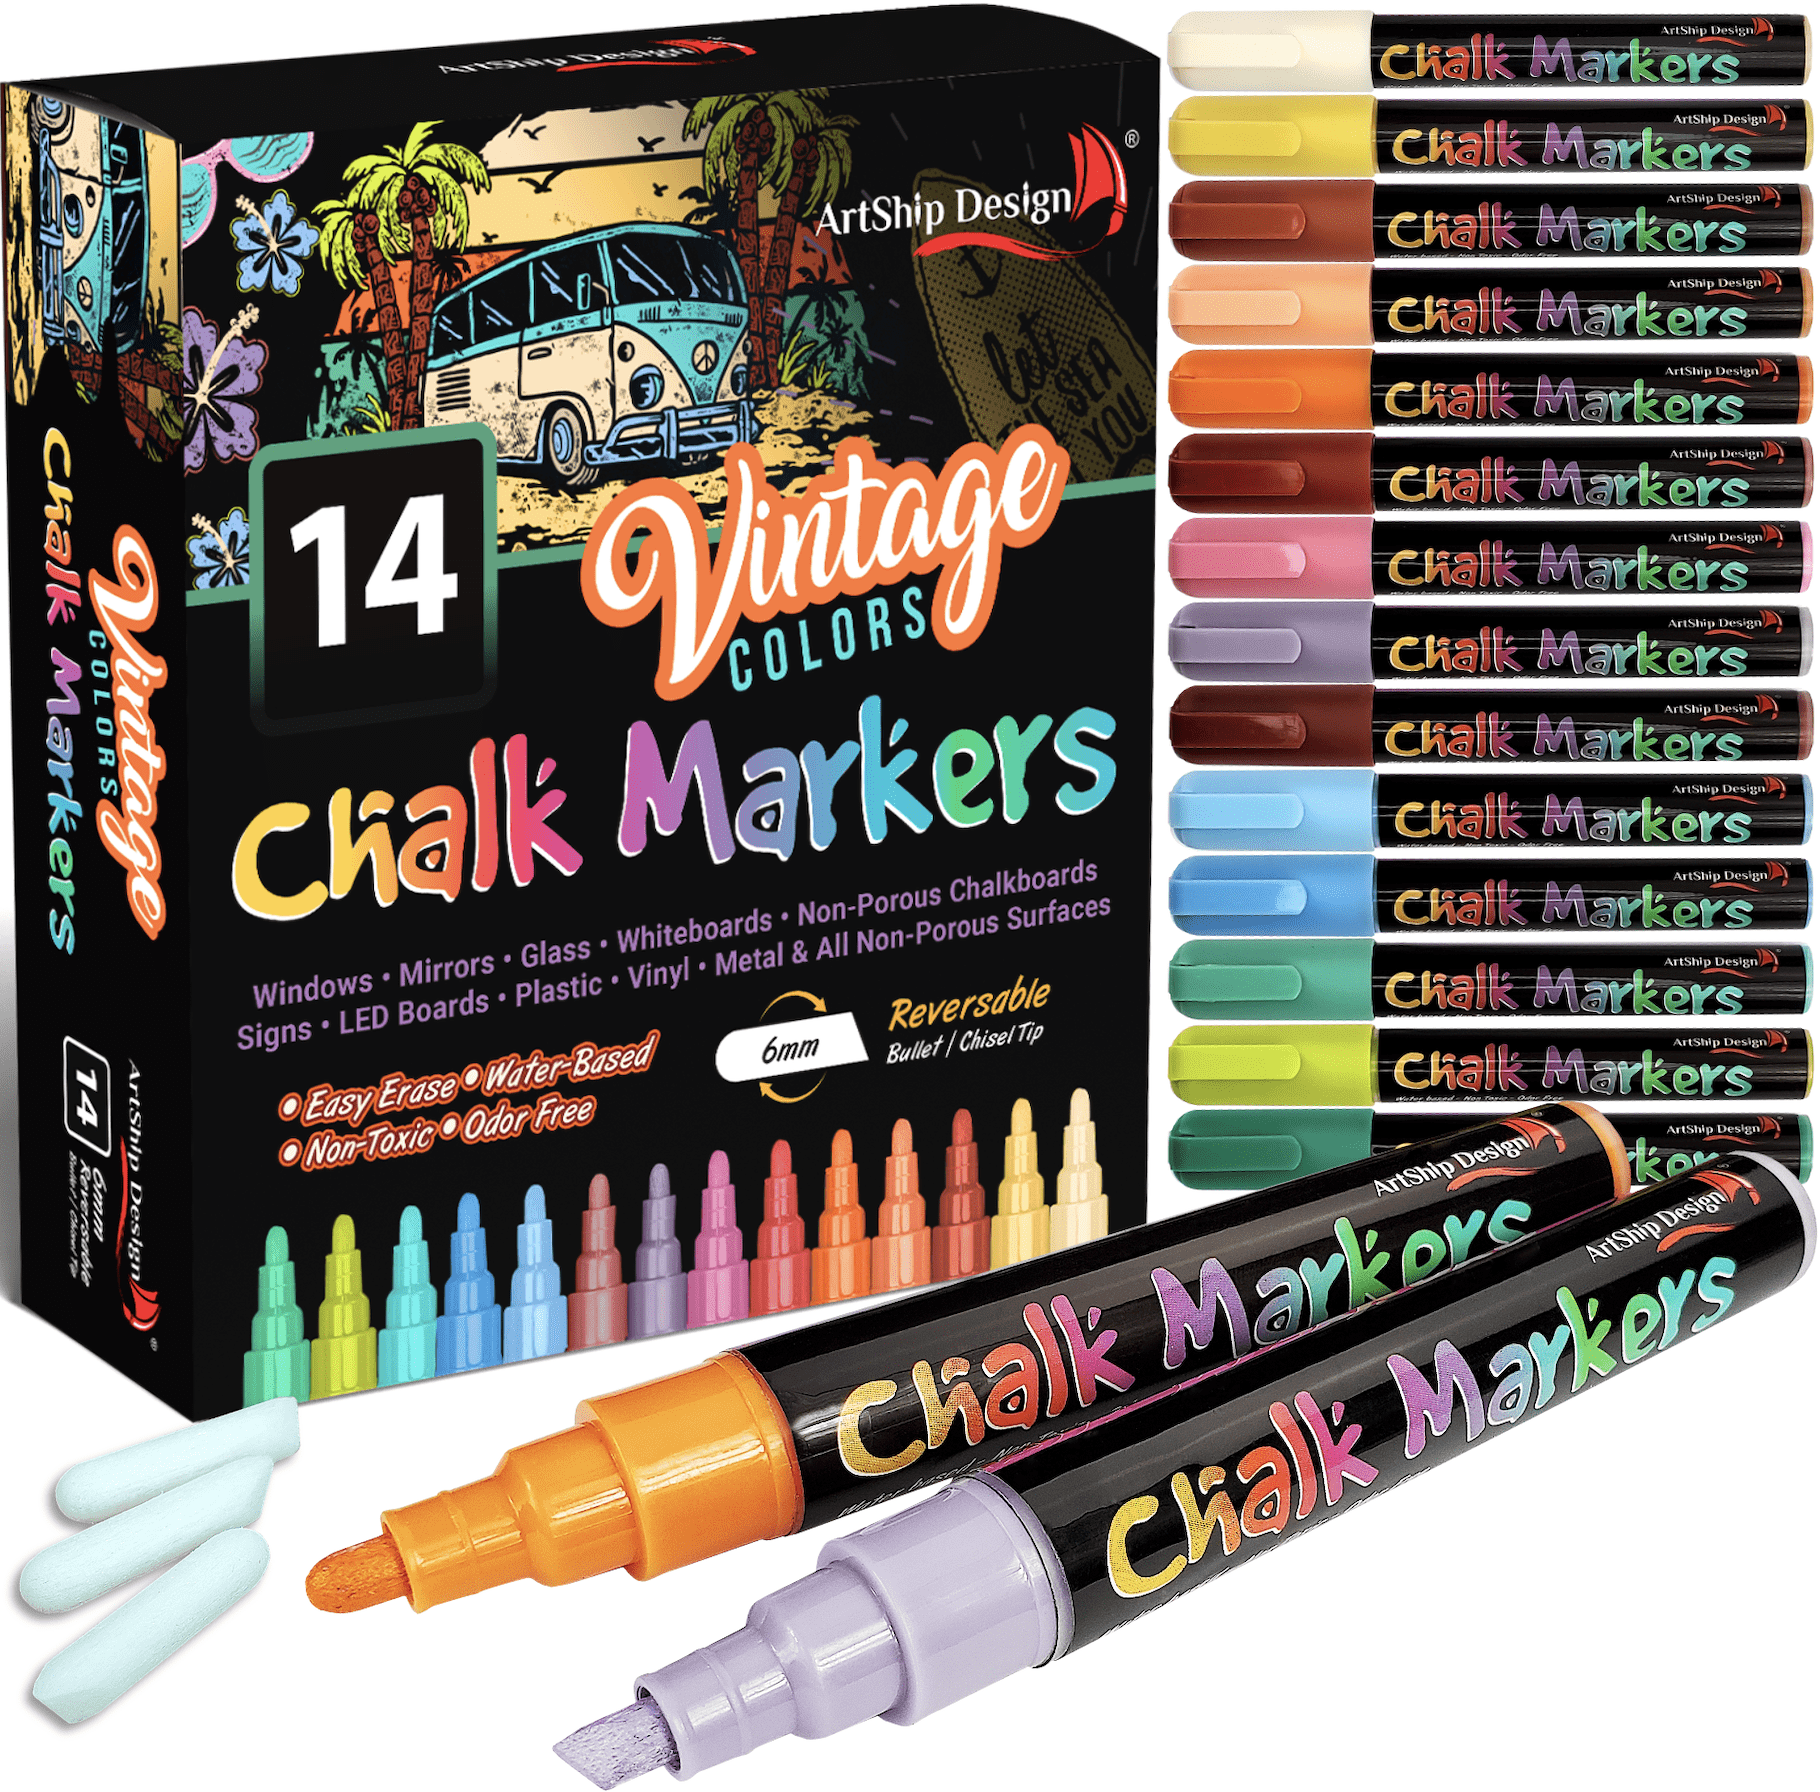 MMFB Arts & Crafts Giant Size Jumbo 15mm Liquid Chalk Markers 8 Pack w/ 45 Chalkboard Labels, Window Markers, 28g Ink, Extra Wide, Reversible 3 in